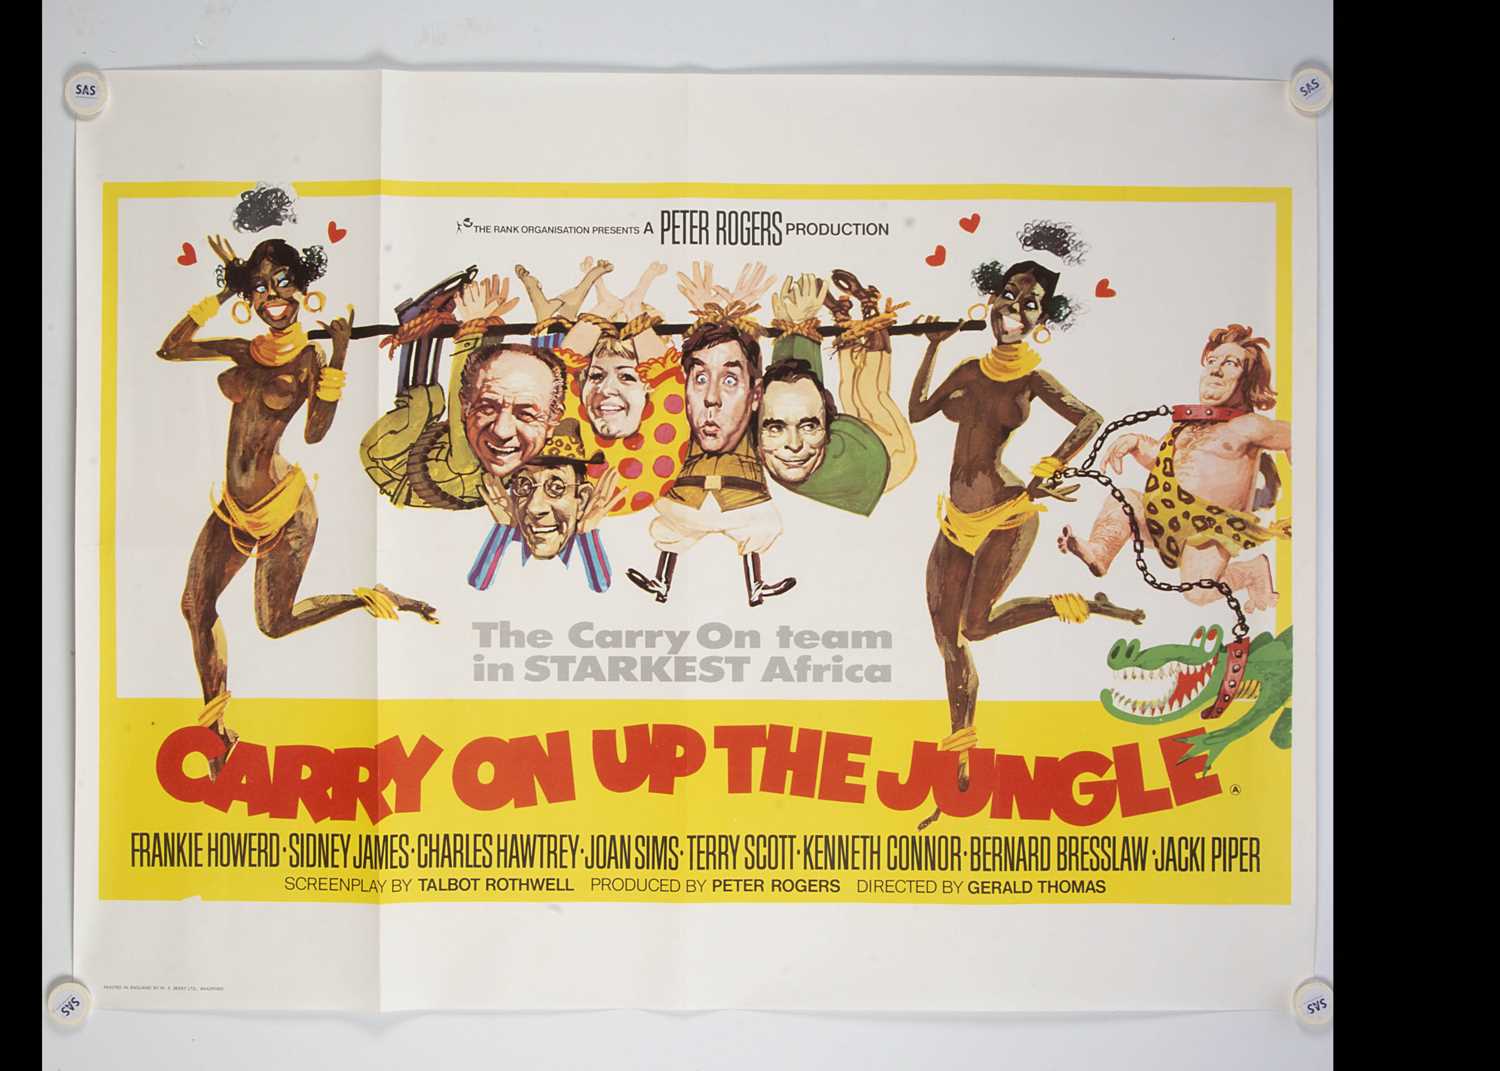 Lot 11 - Carry On Up The Jungle (1970) Quad Poster